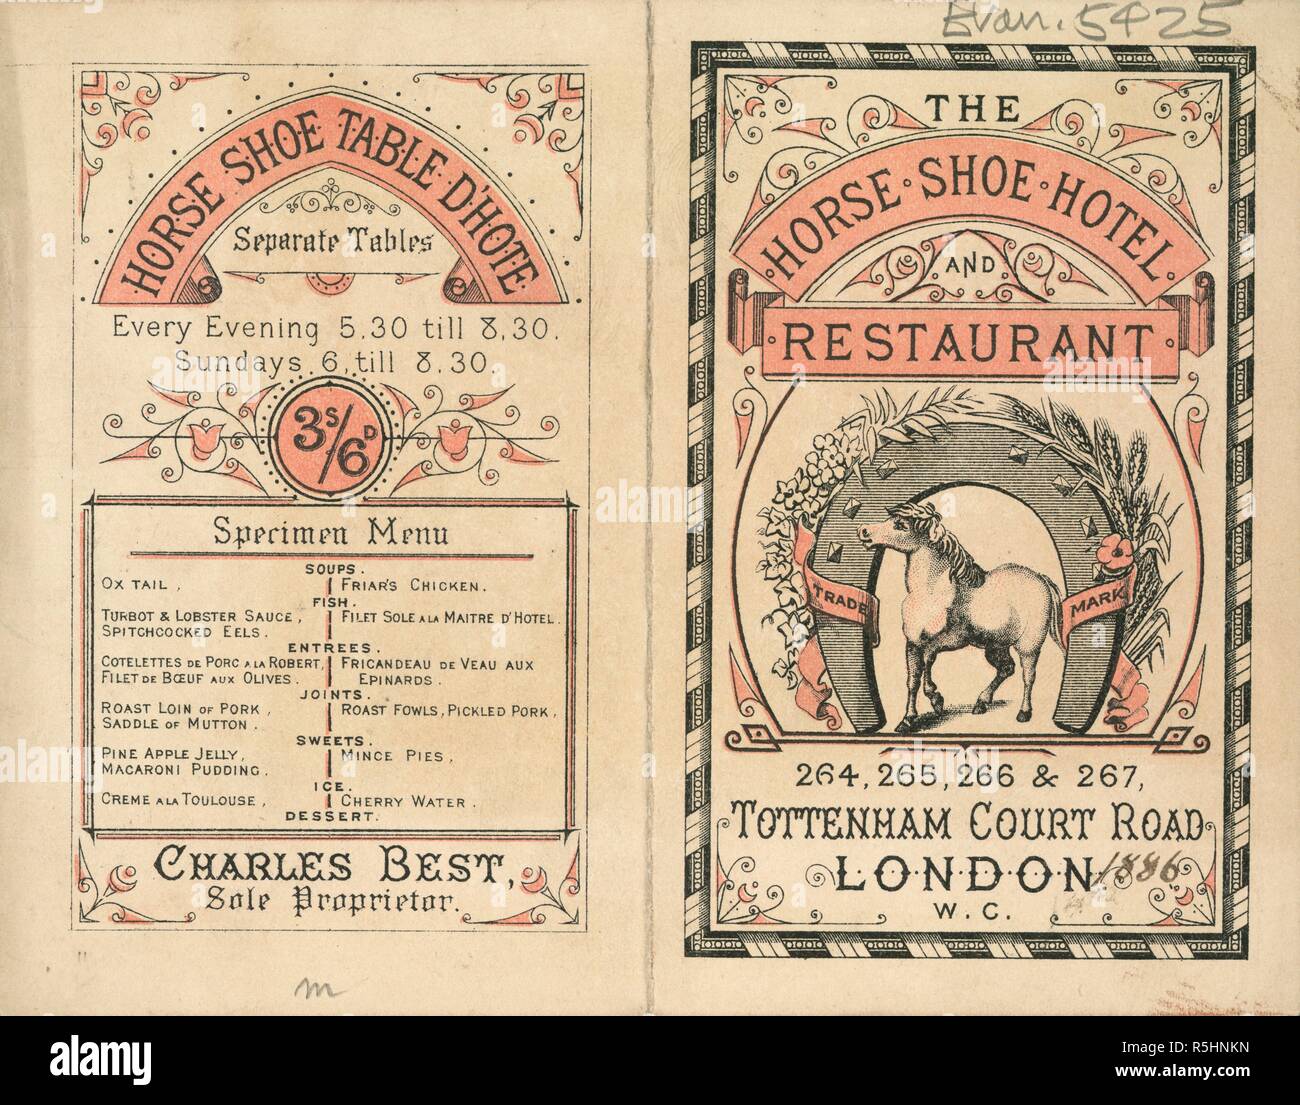 Horse Shoe Hotel and Restaurant, Tottenham Court Road, London, W.C. Contains the Horse Shoe Hotel & Restaurant table of charges, on the inner leaves, and a specimen menu and name of the proprietor, Charles Best, on the final leaf. Advertisement. A collection of pamphlets, handbills, and miscellaneous printed matter relating to Victorian entertainment and everyday life. [London], [1886]. Source: EVAN.5425. Language: English. Author: Evanion, Henry. Stock Photo